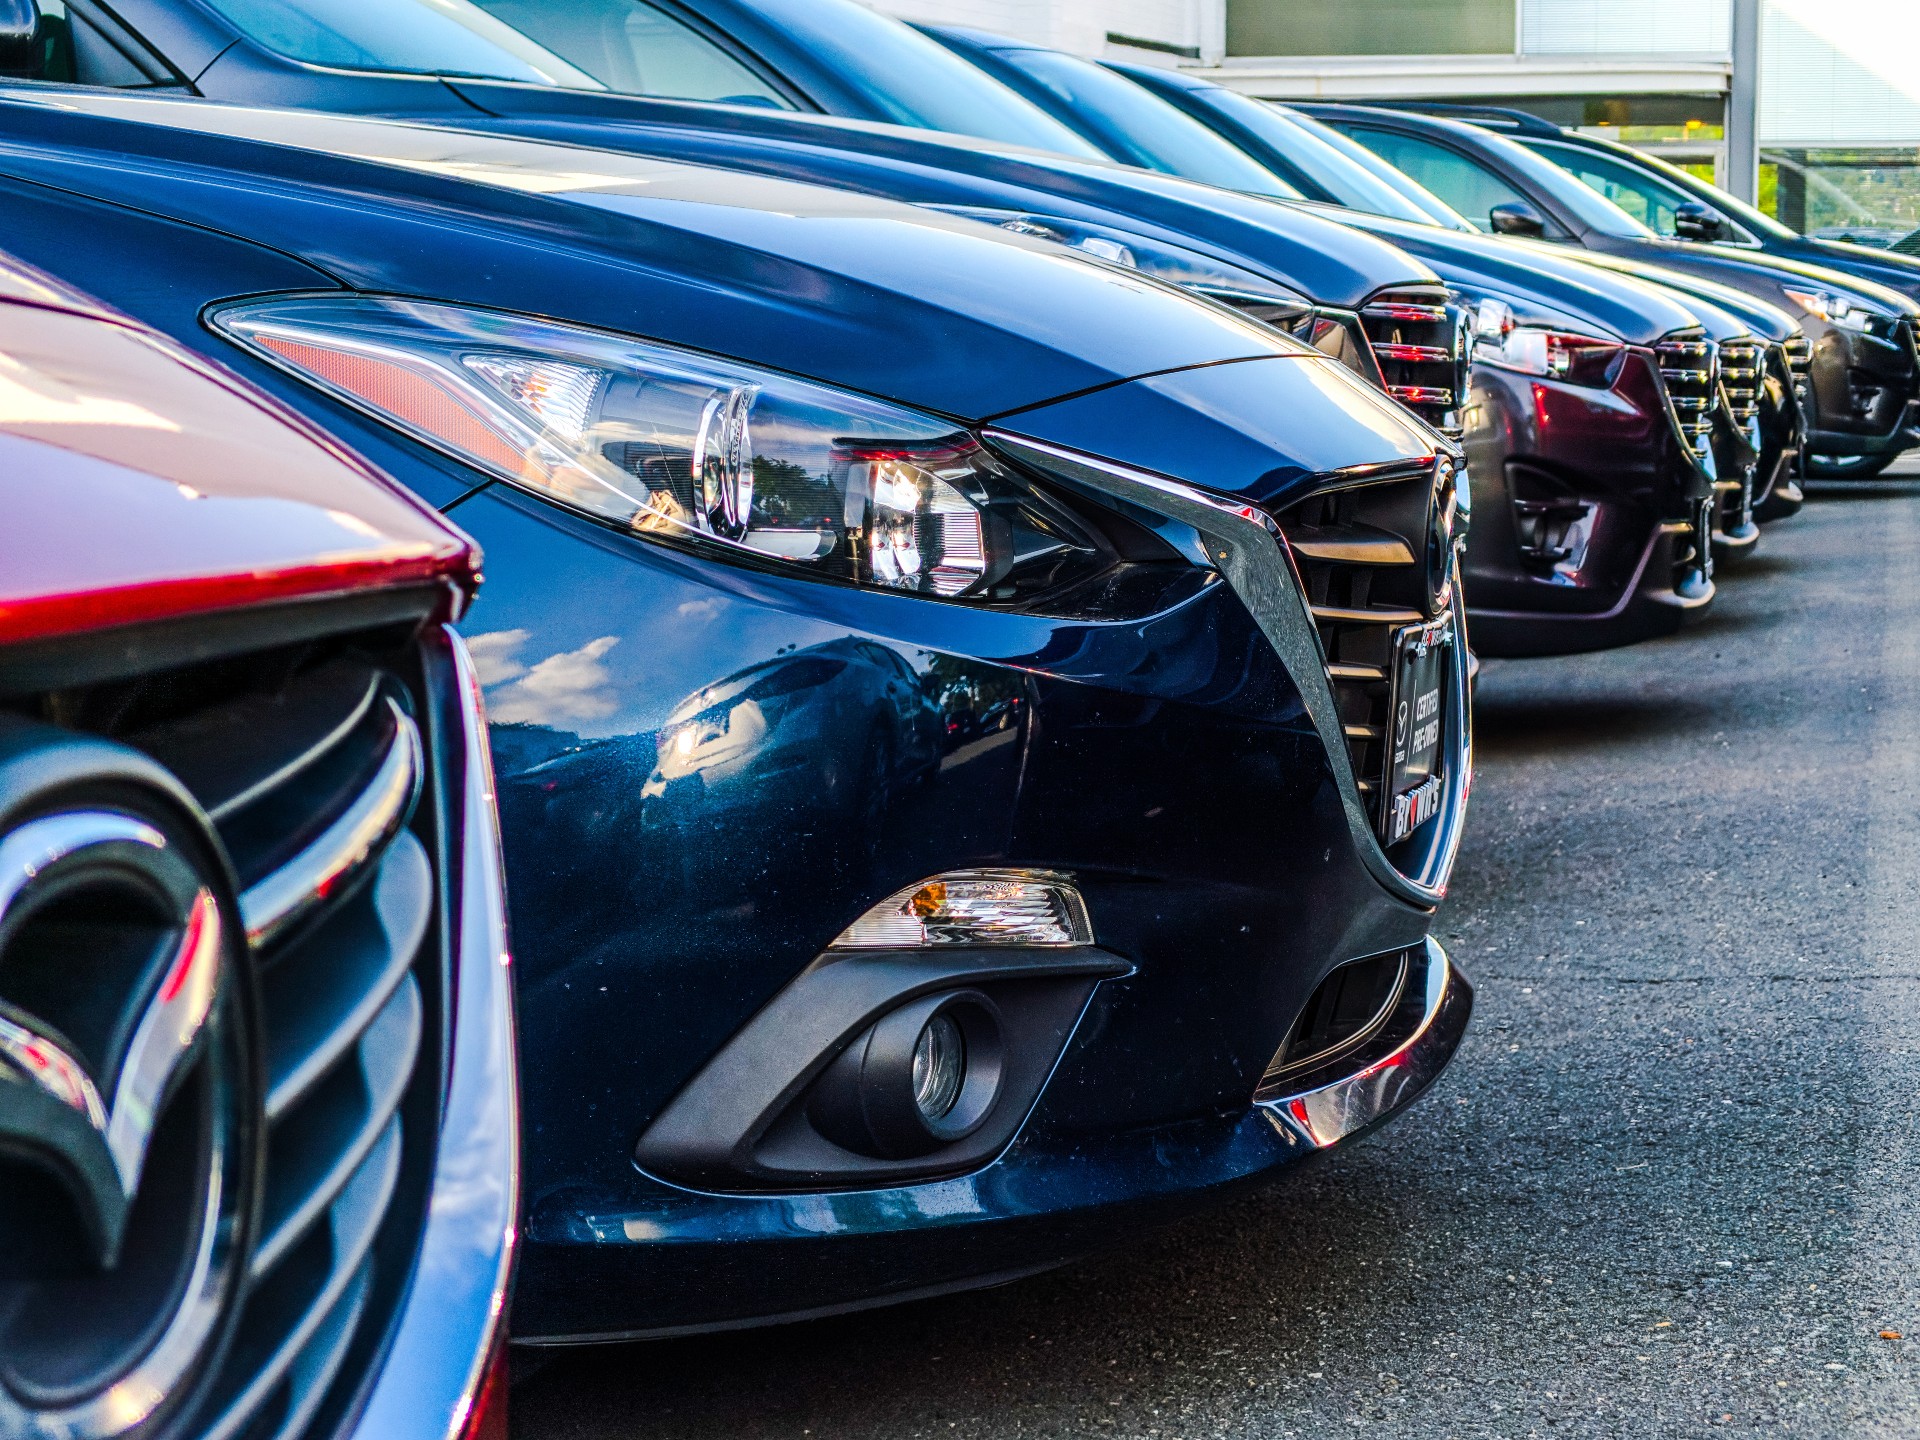 Cars for sale in a row at a car dealership